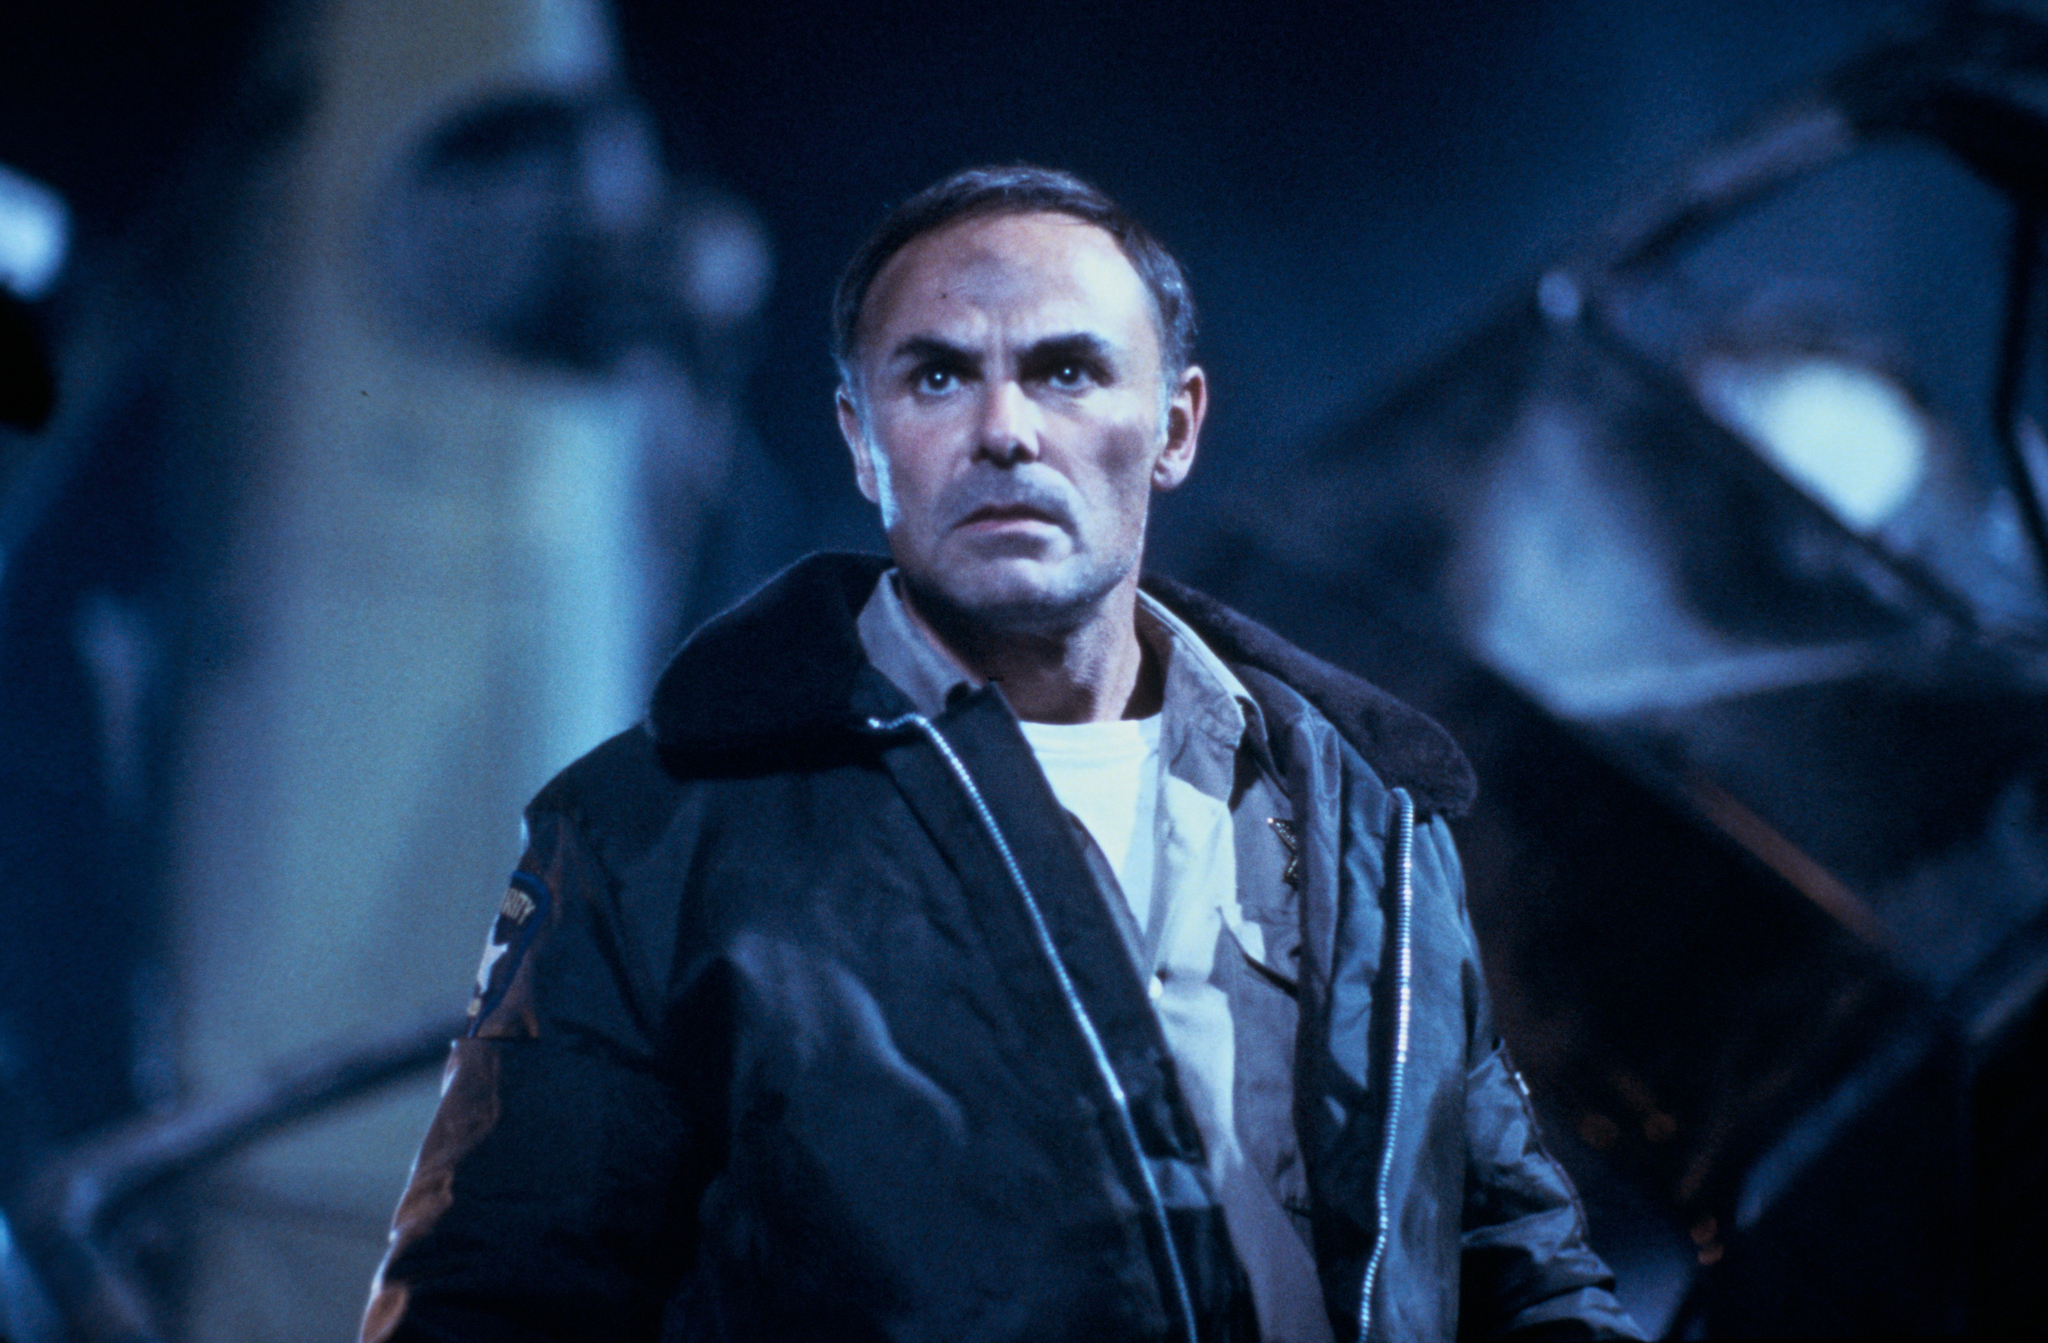 John Saxon is in a marital relationship with his second wife Gloria Martel.